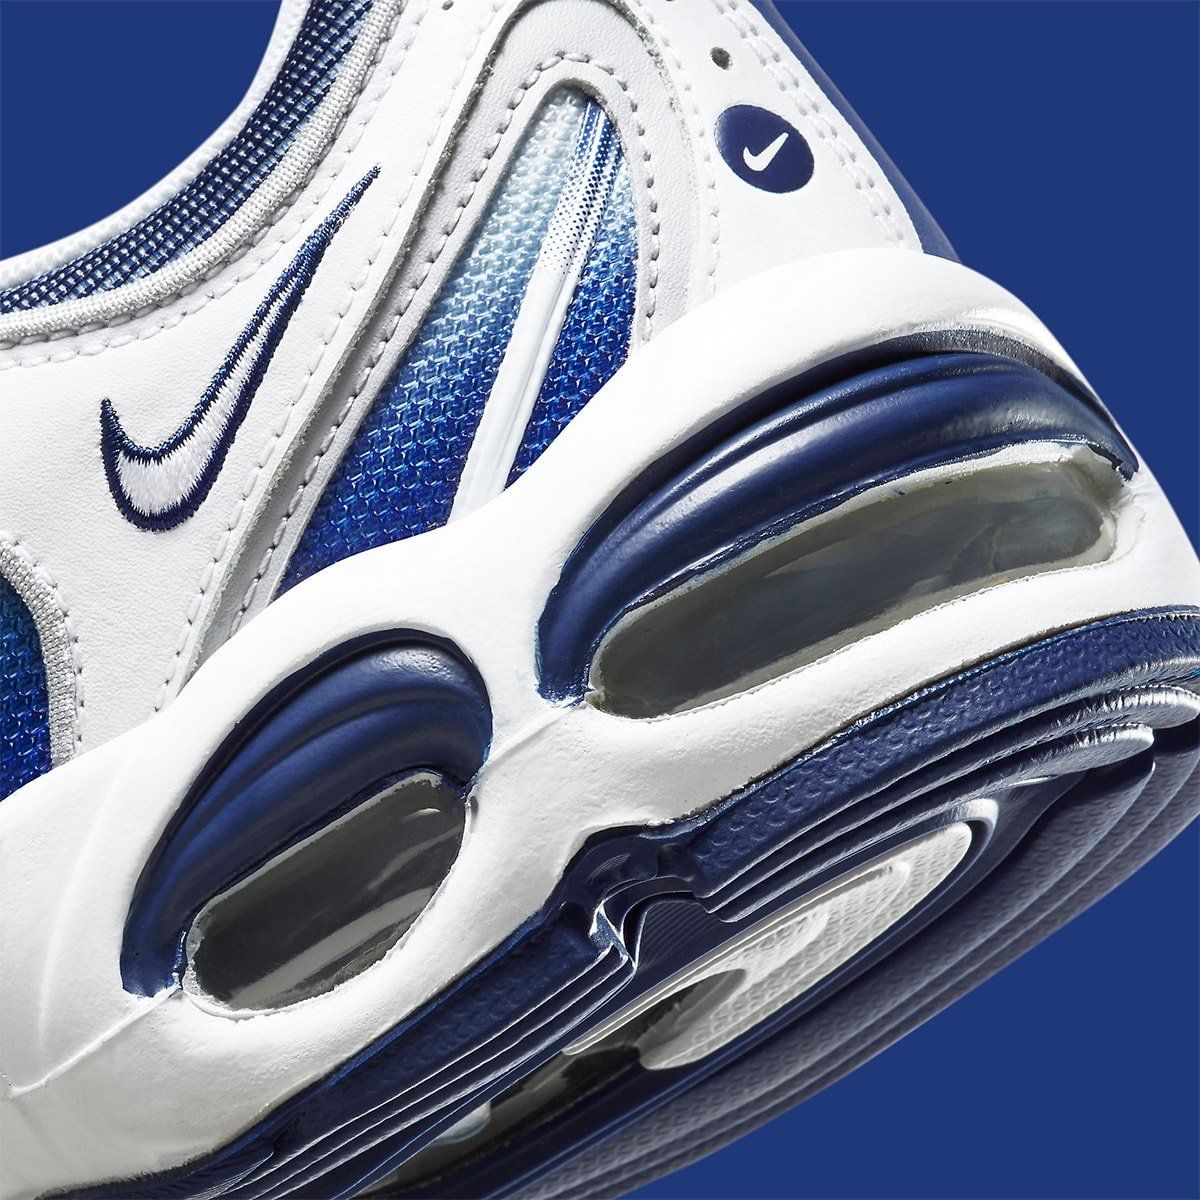 The Nike Tailwind IV Welcomes White and Navy Gradients | HOUSE OF HEAT